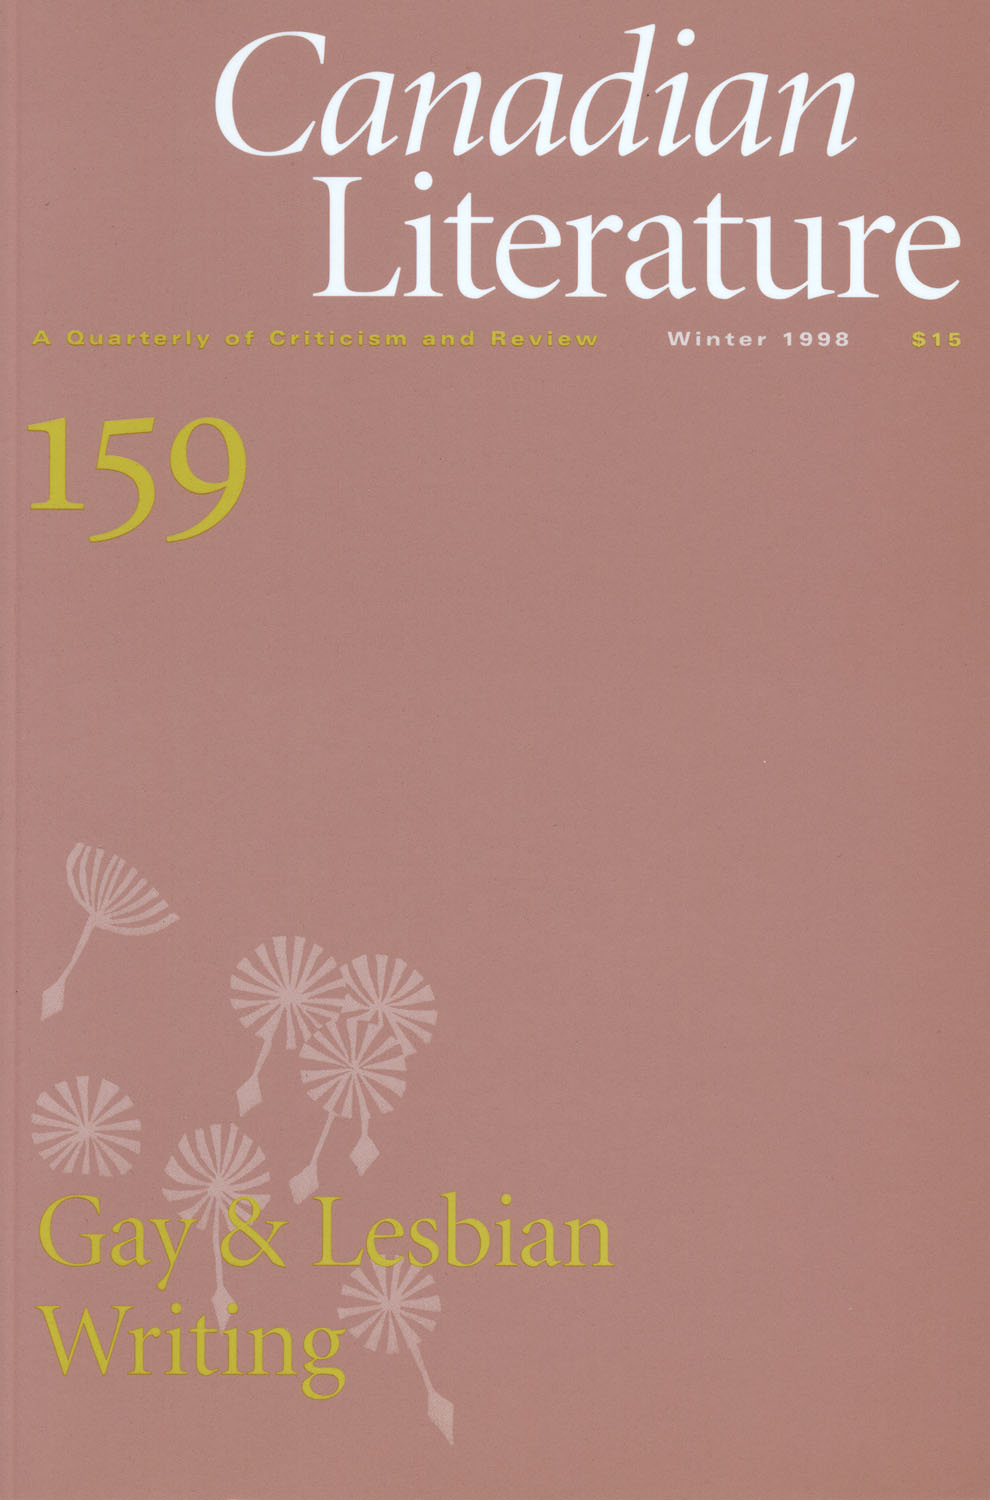 					View No. 159 (1998): Gay and Lesbian Writing in Canadian Literature
				